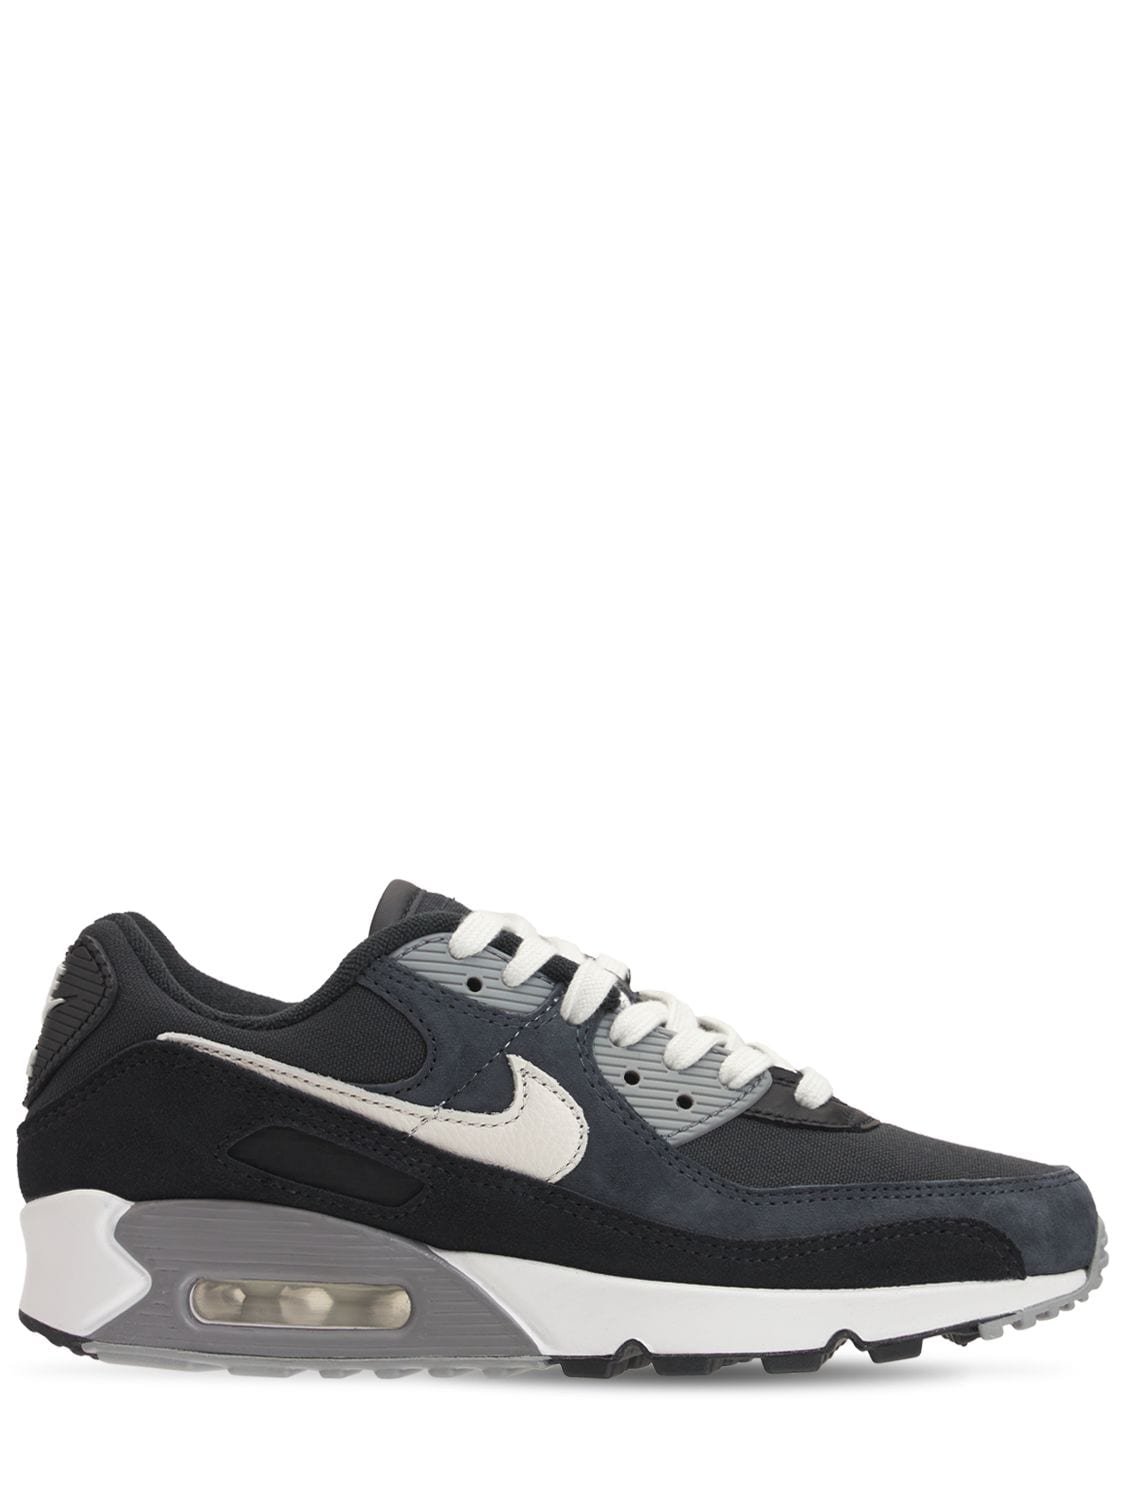 NIKE AIR MAX 90 trainers,74IYJP023-MDAZ0